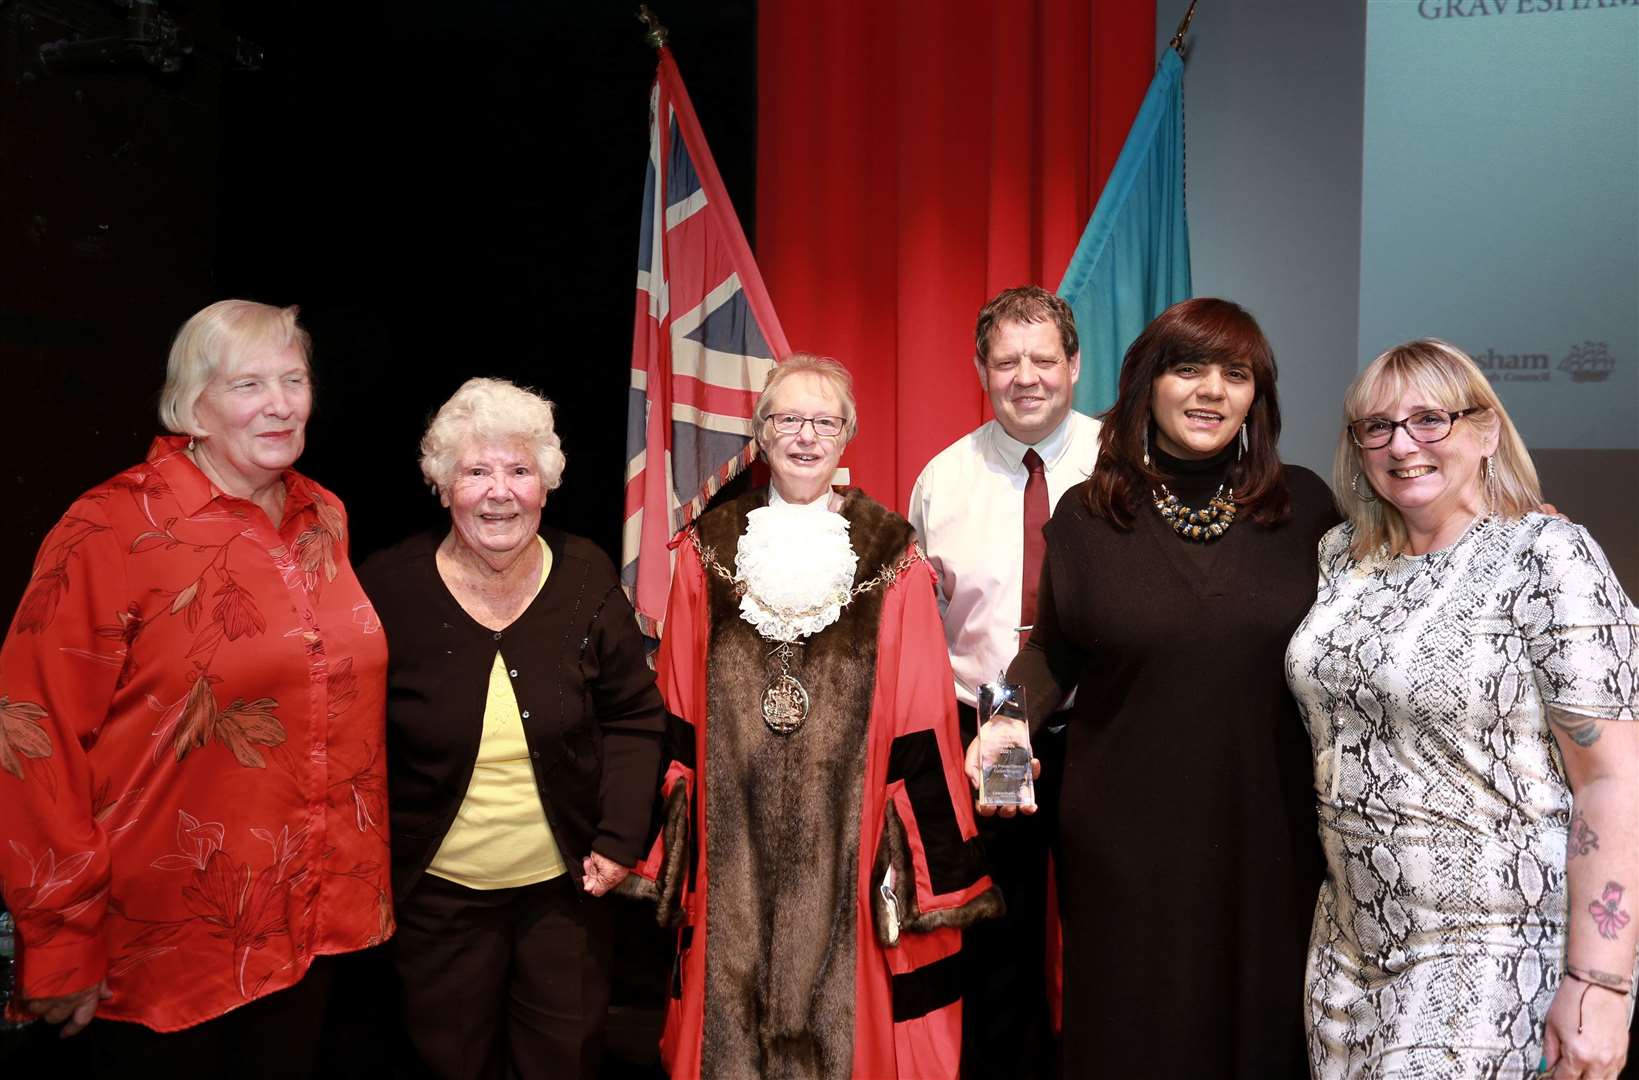 City Praise Centre Lunch Angels with Mayor Cllr Lyn Milner. Pictures Phil Lee/Gravesham council